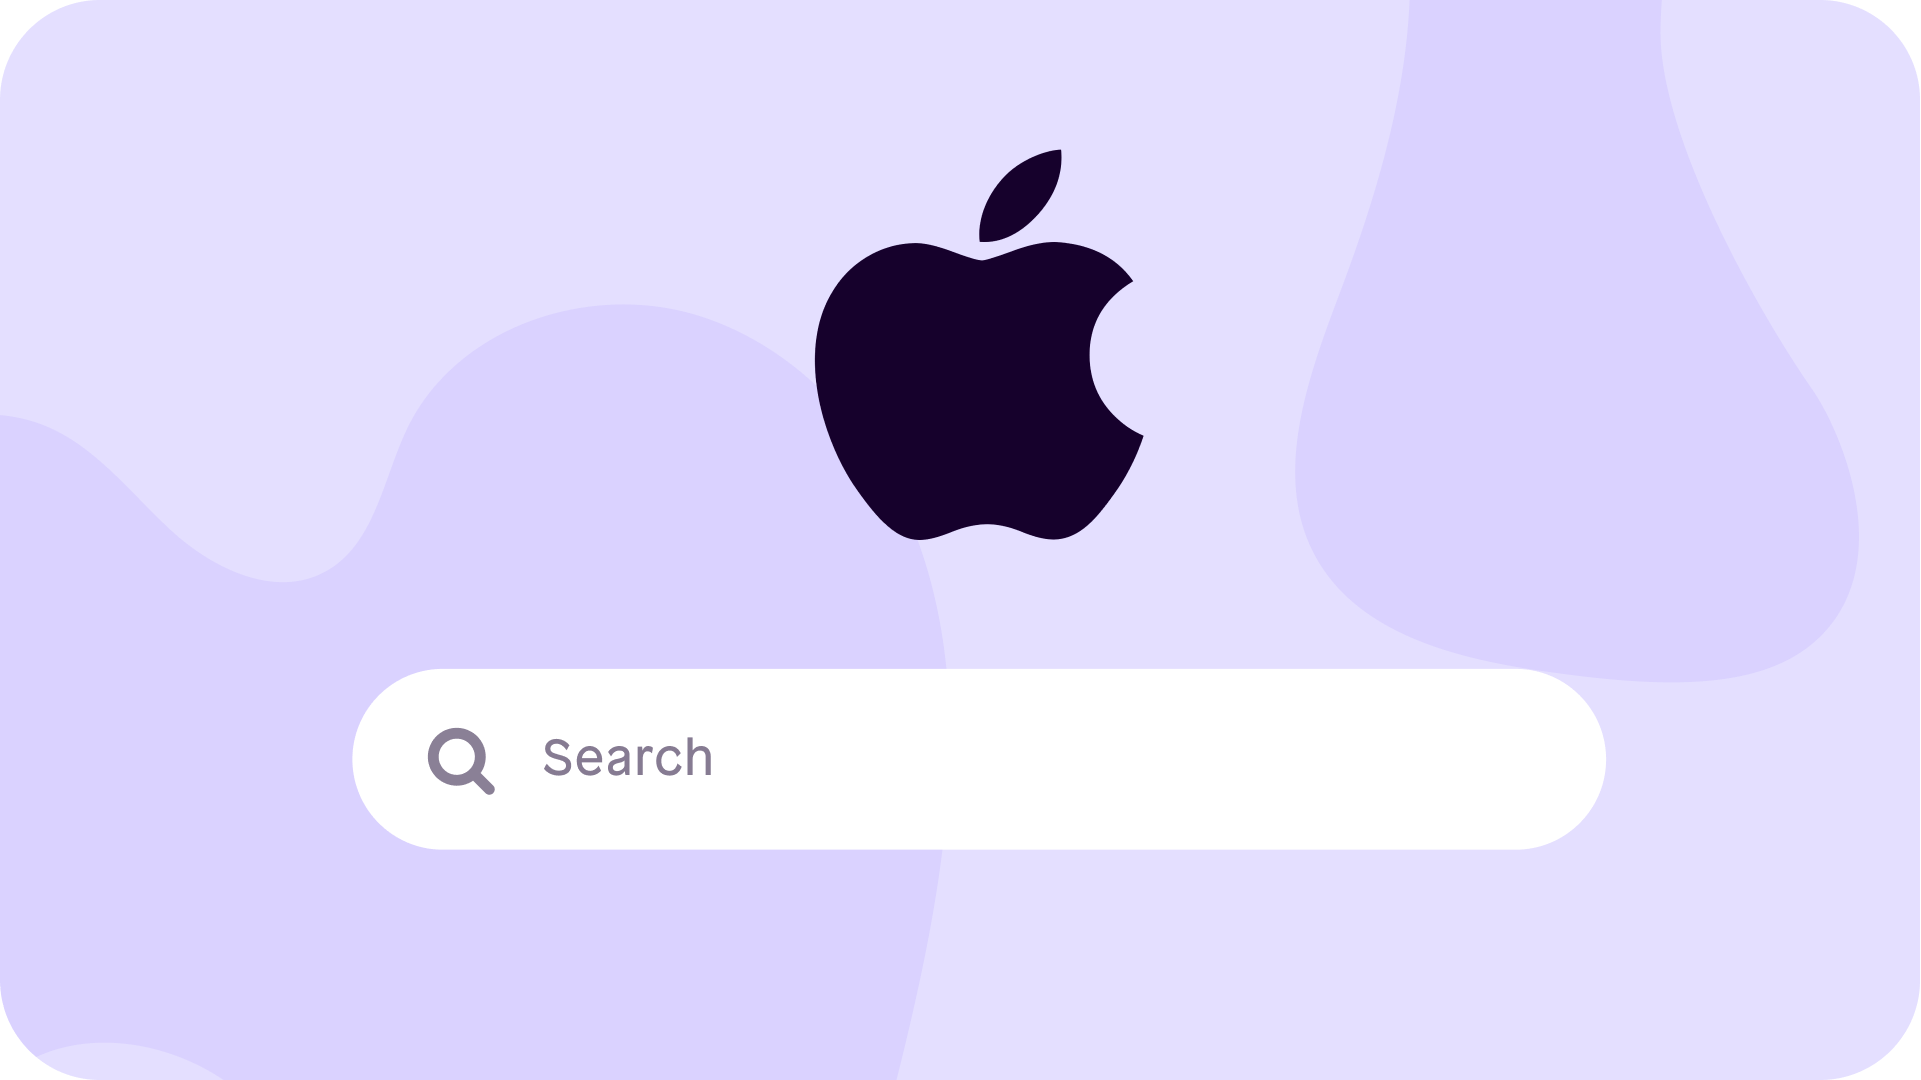 An Apple search engine